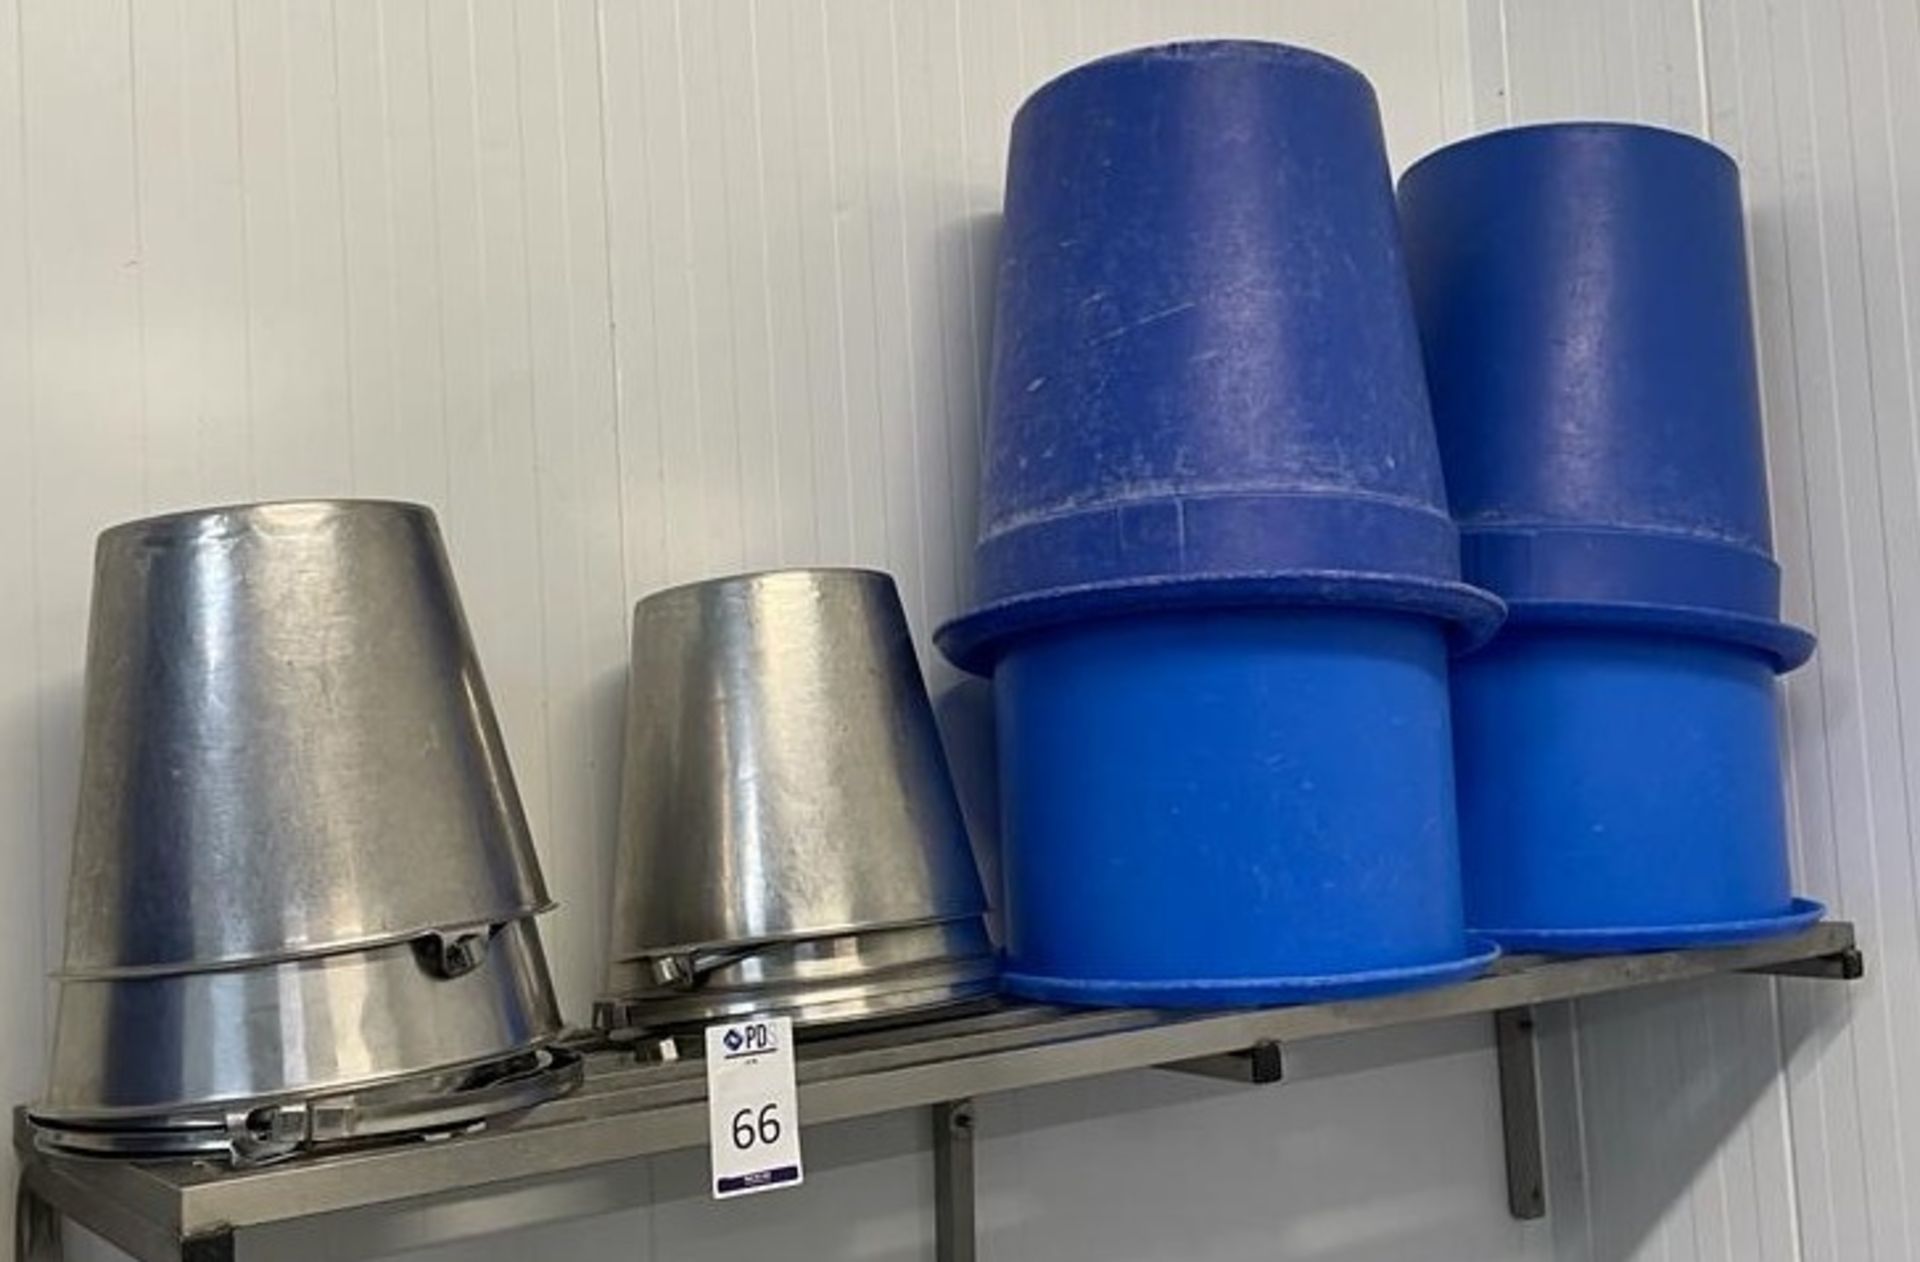 3 Stainless Steel Wall Shelves with Ingredient Bins & Stainless Steel Bins (Location: NW London.